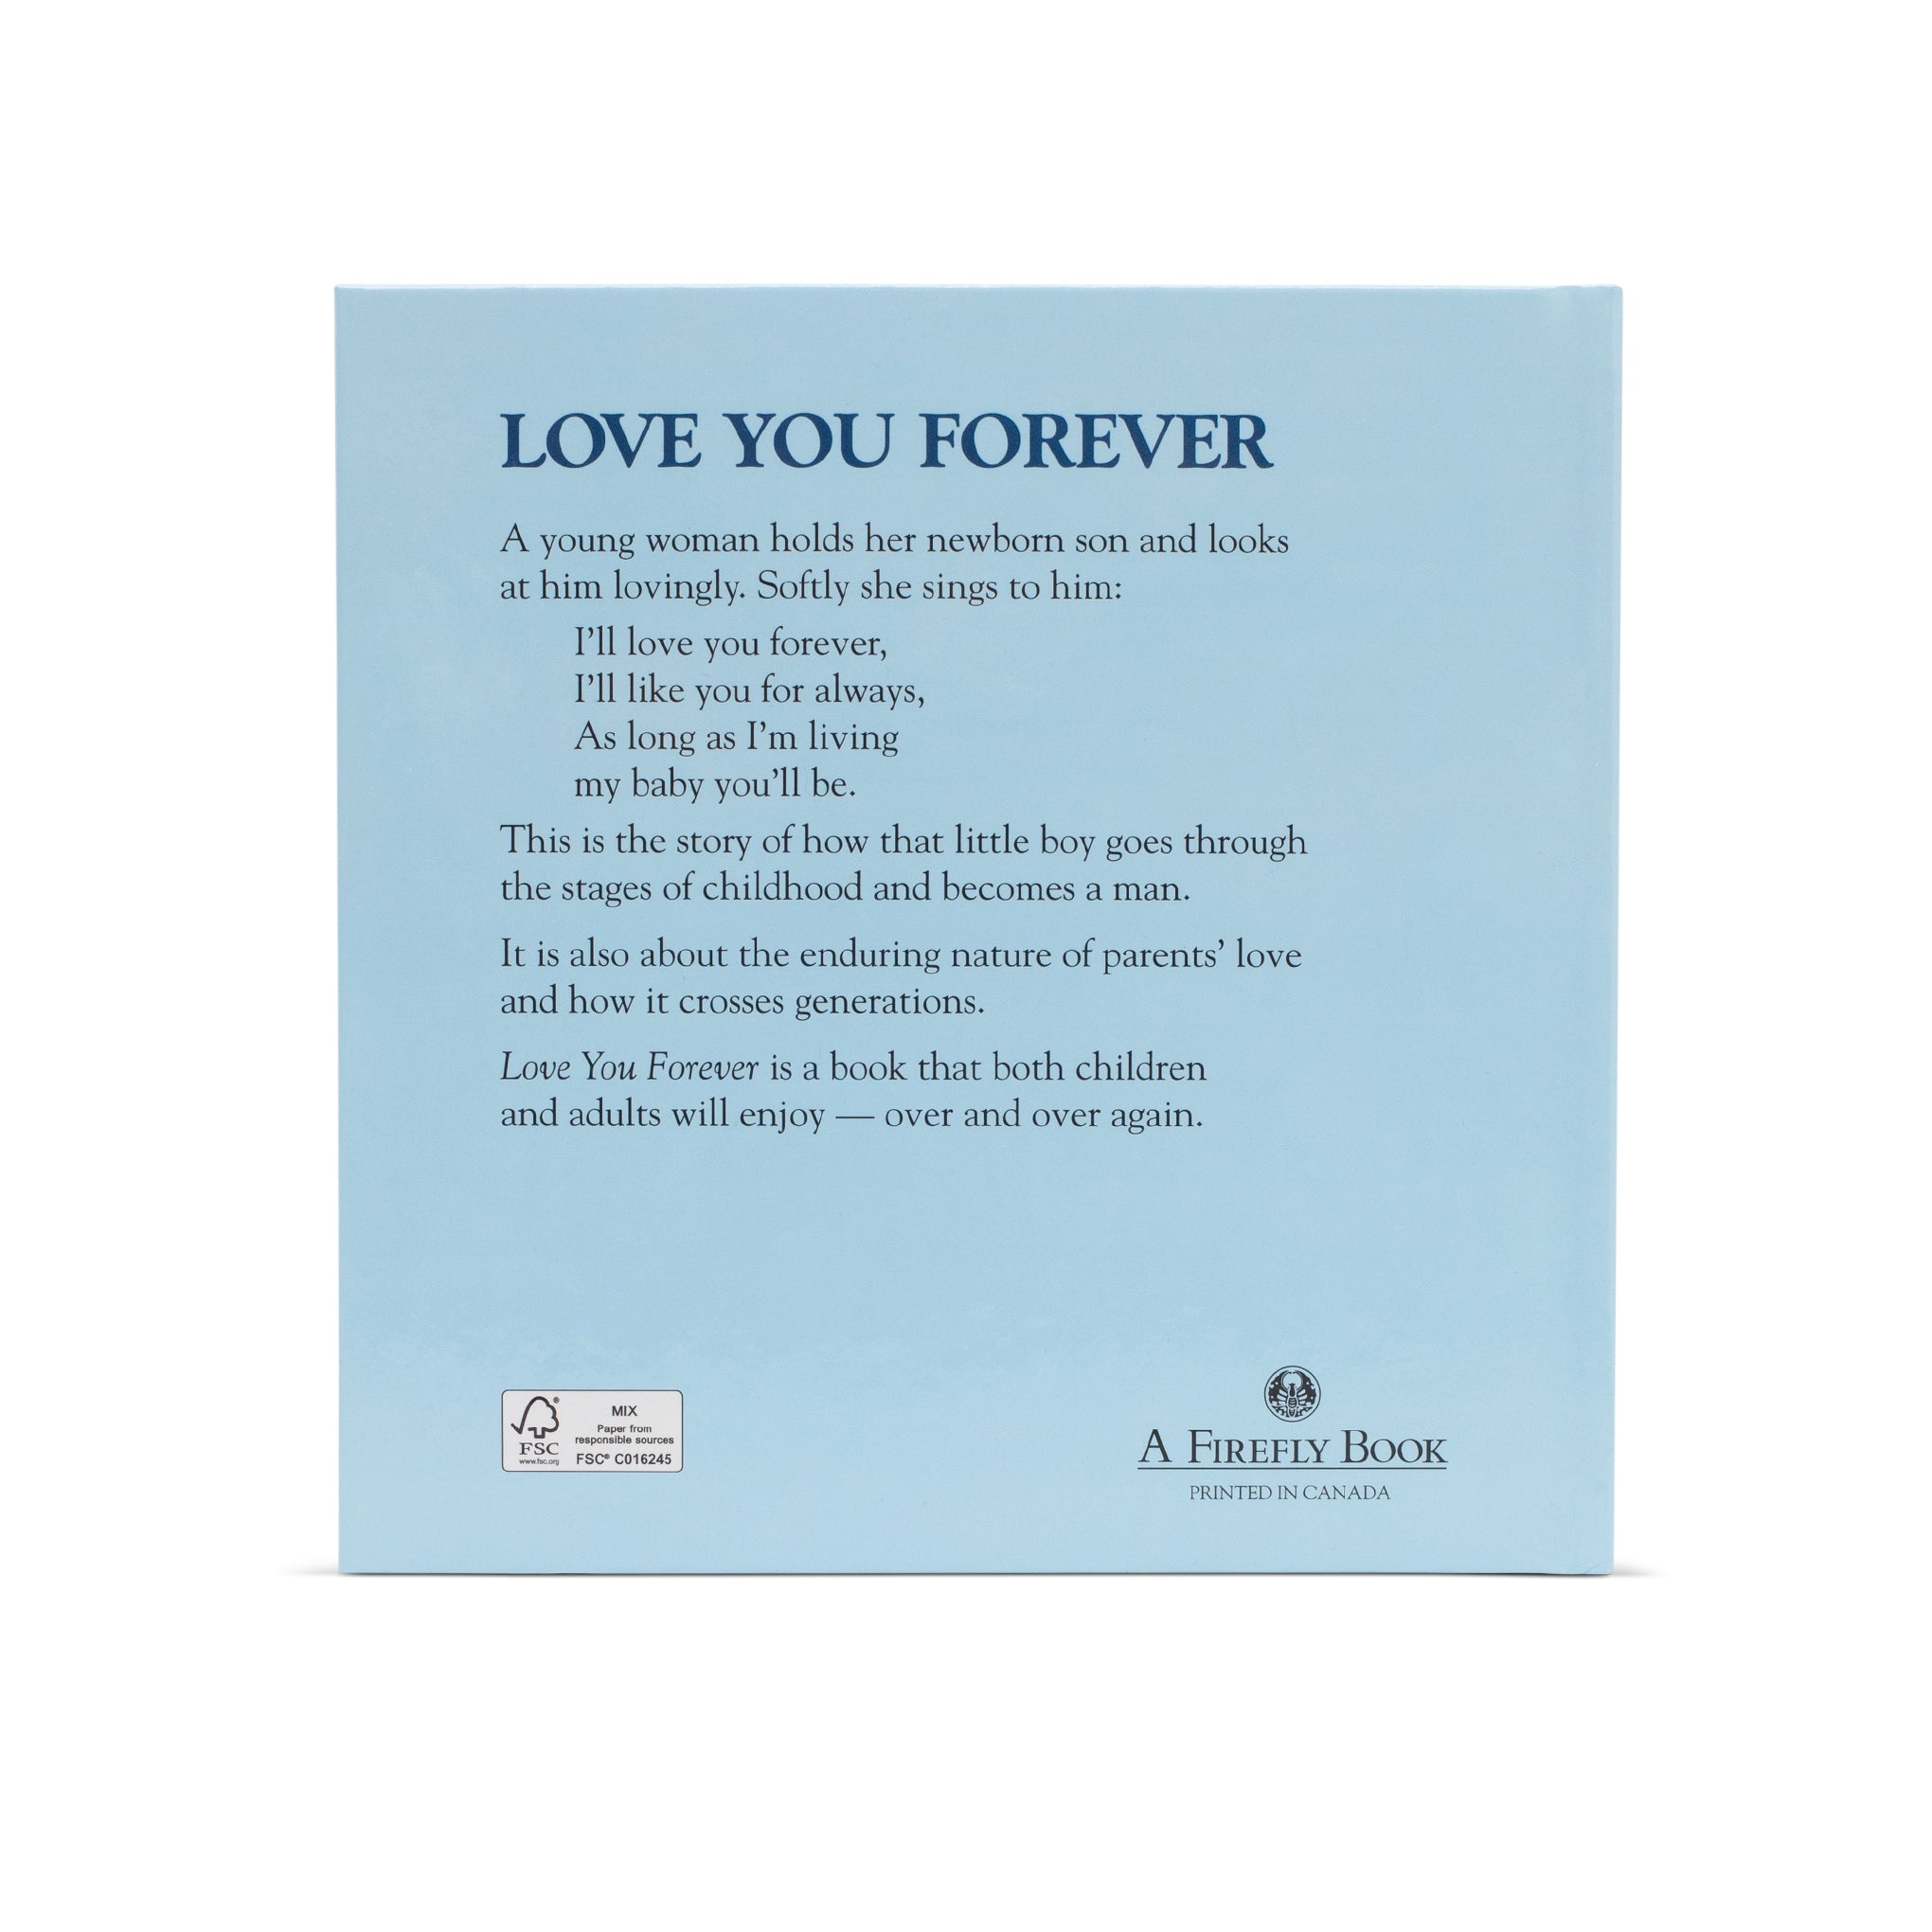 LOVE YOU FOREVER BOOK NOCTA EDITION